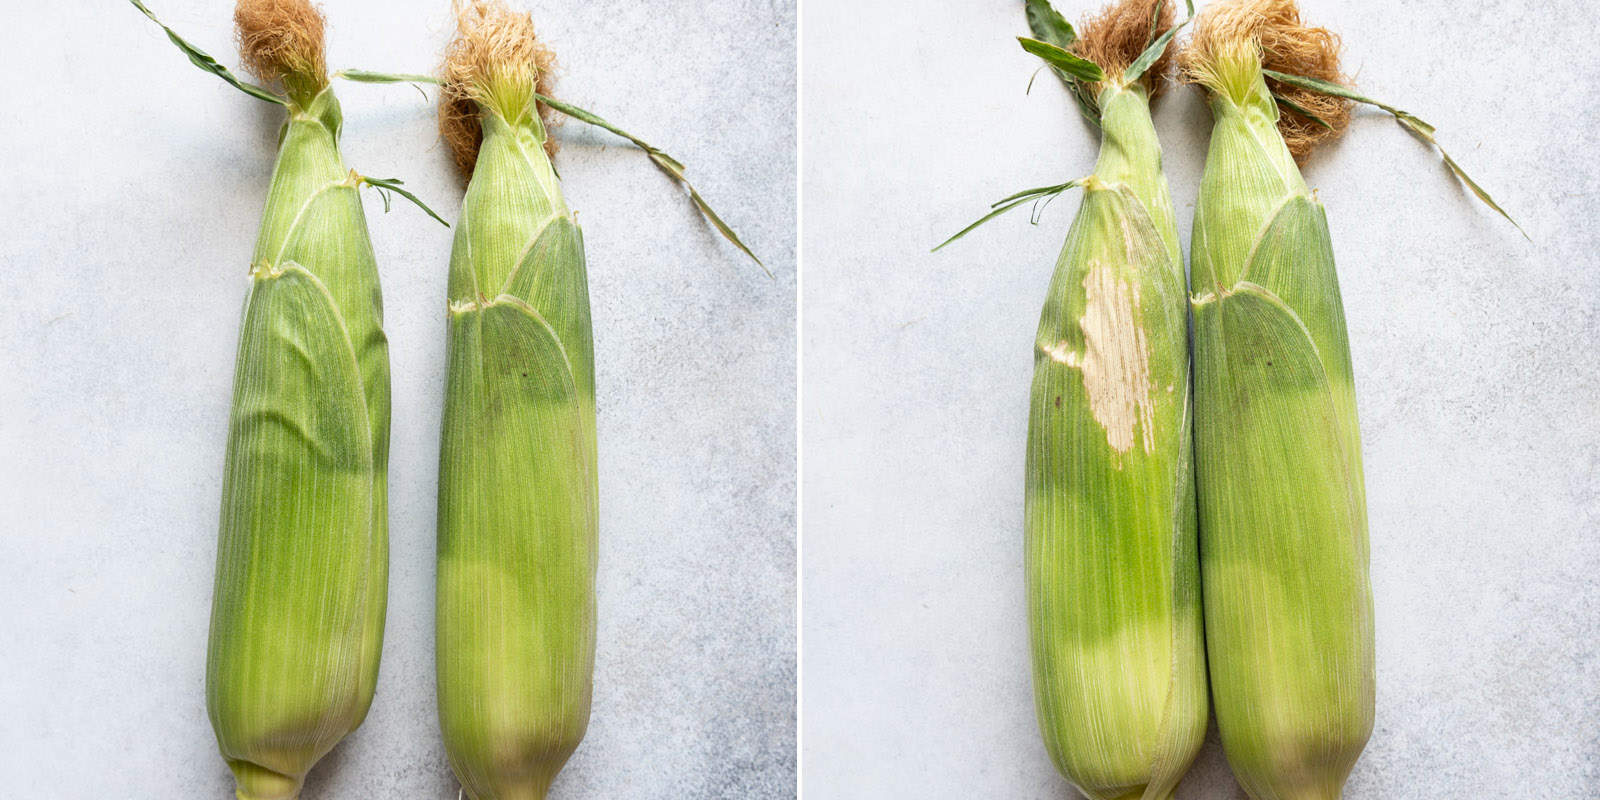 Comparison photo of corn husks with and without leaf scald